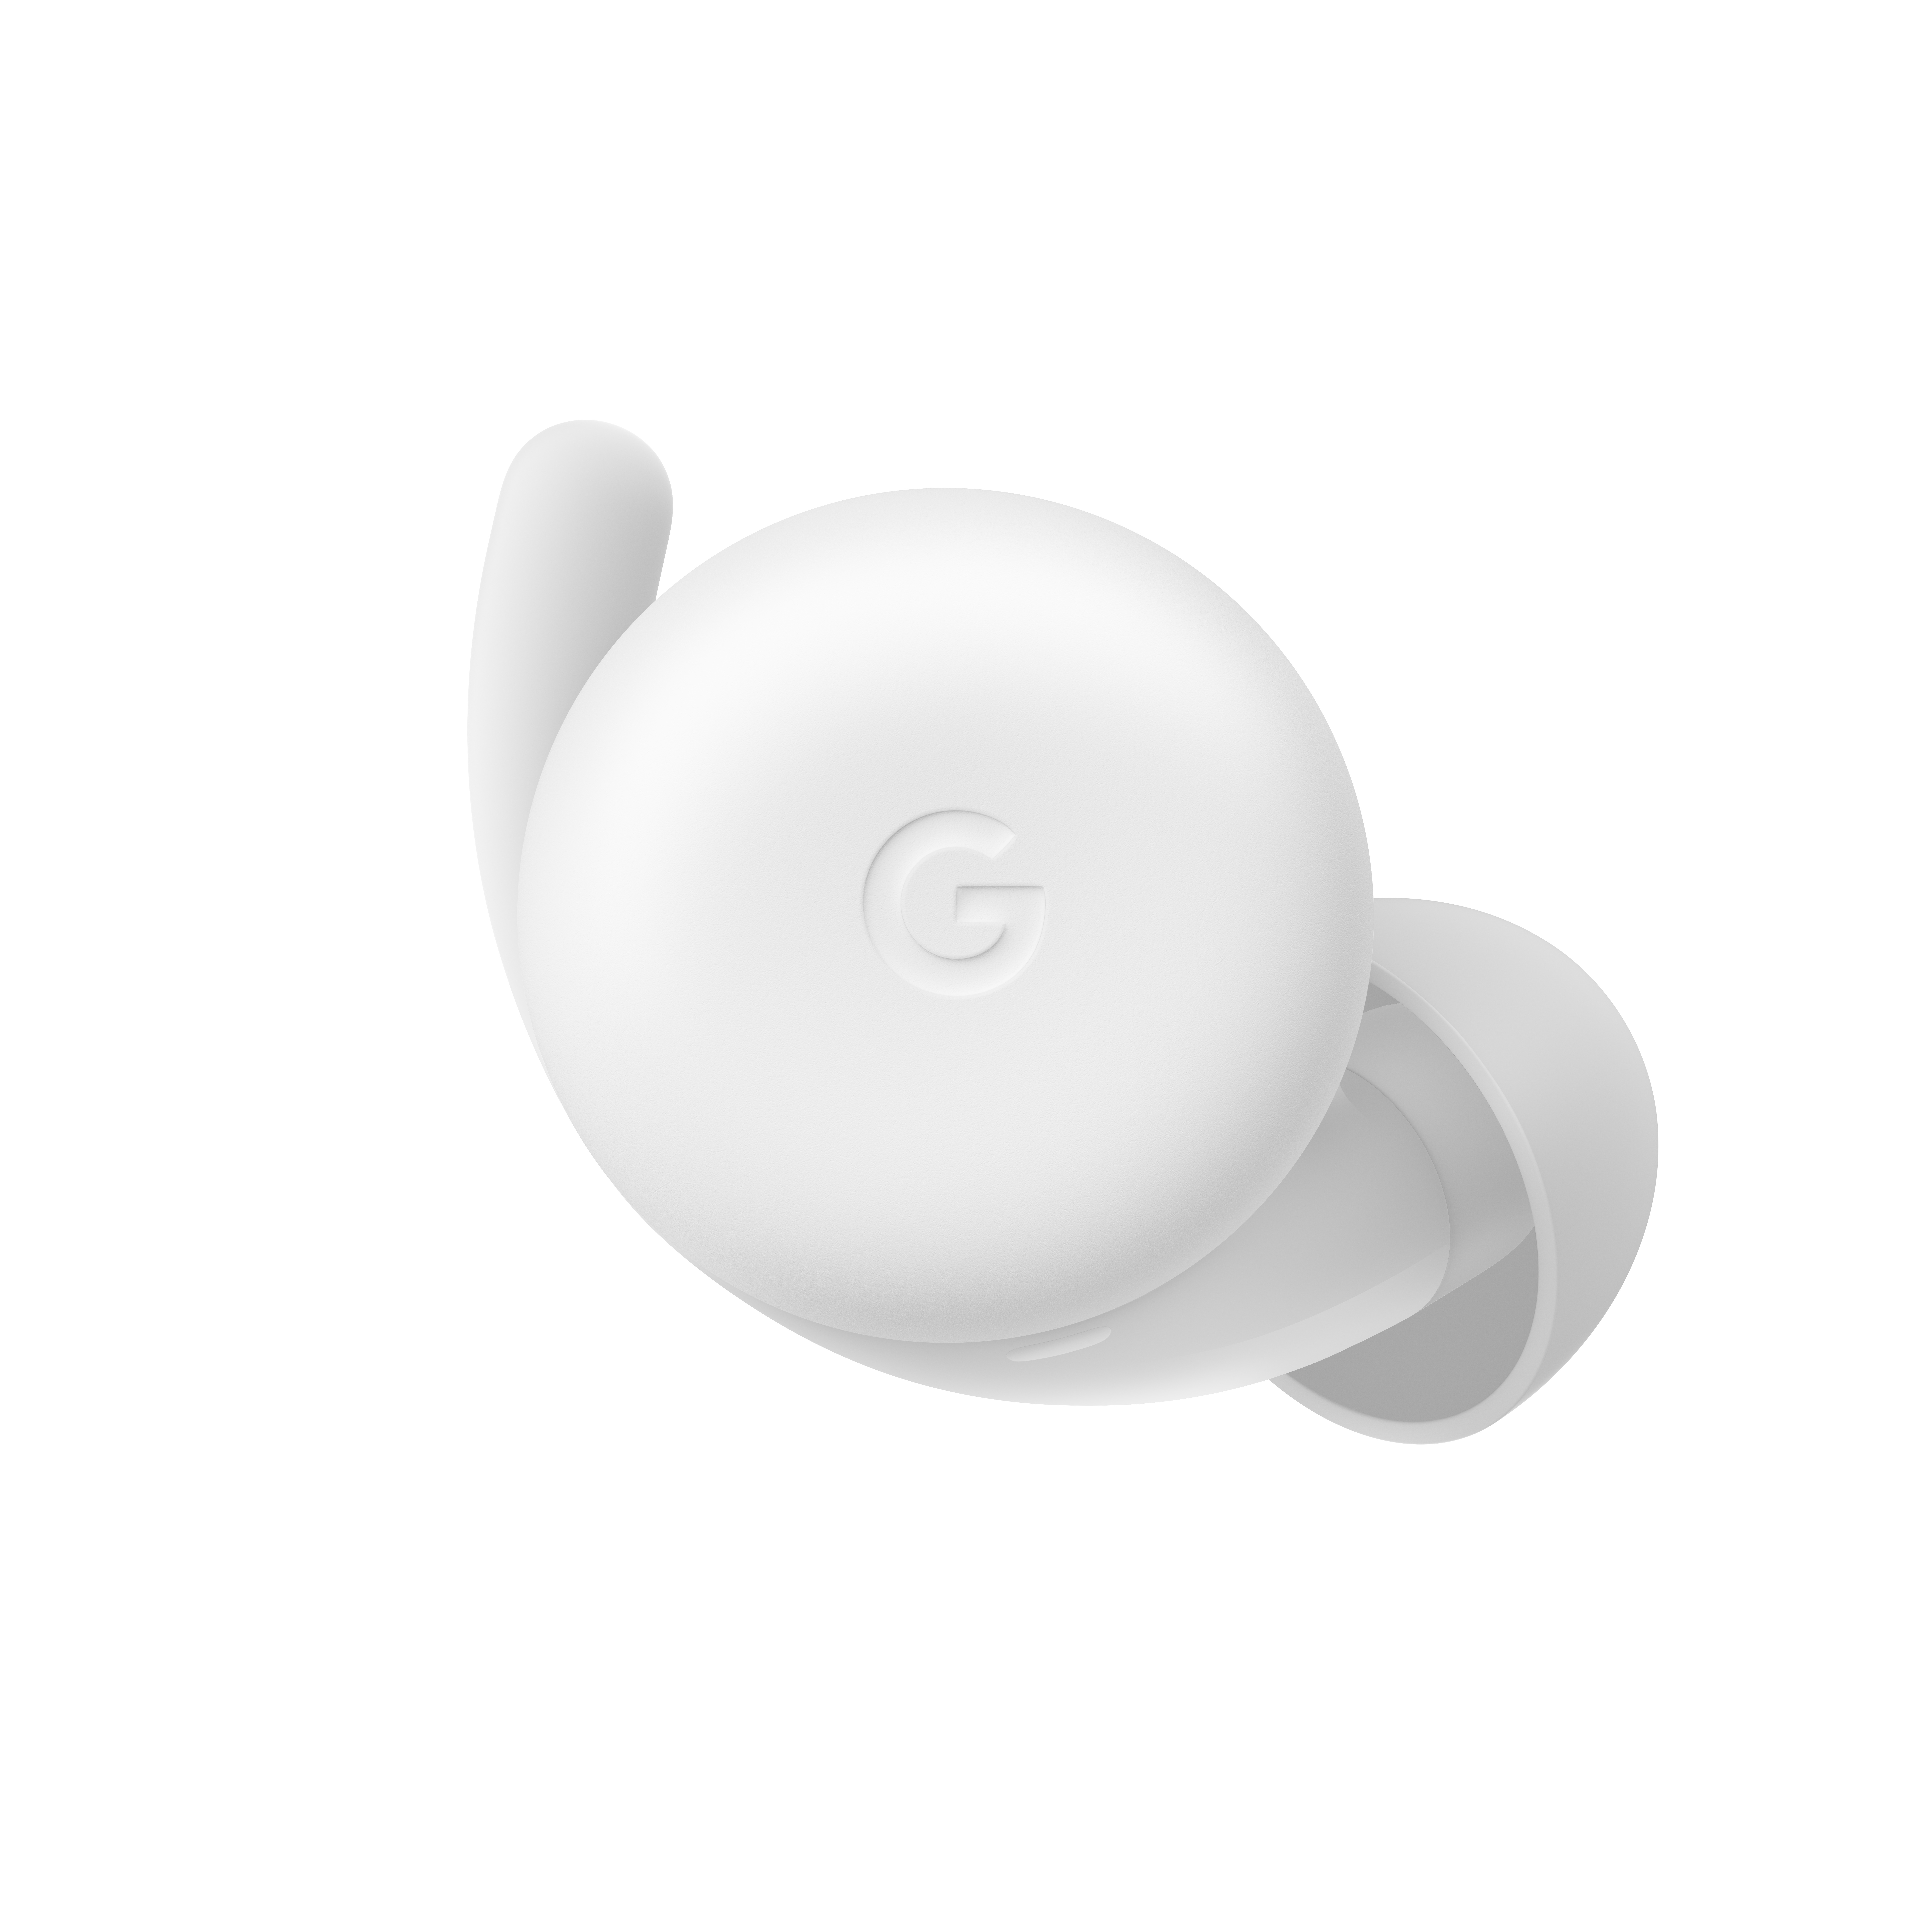 Google Pixel Buds A-Series - Truly Wireless Earbuds - Audio Headphones with Bluetooth - White - image 4 of 8